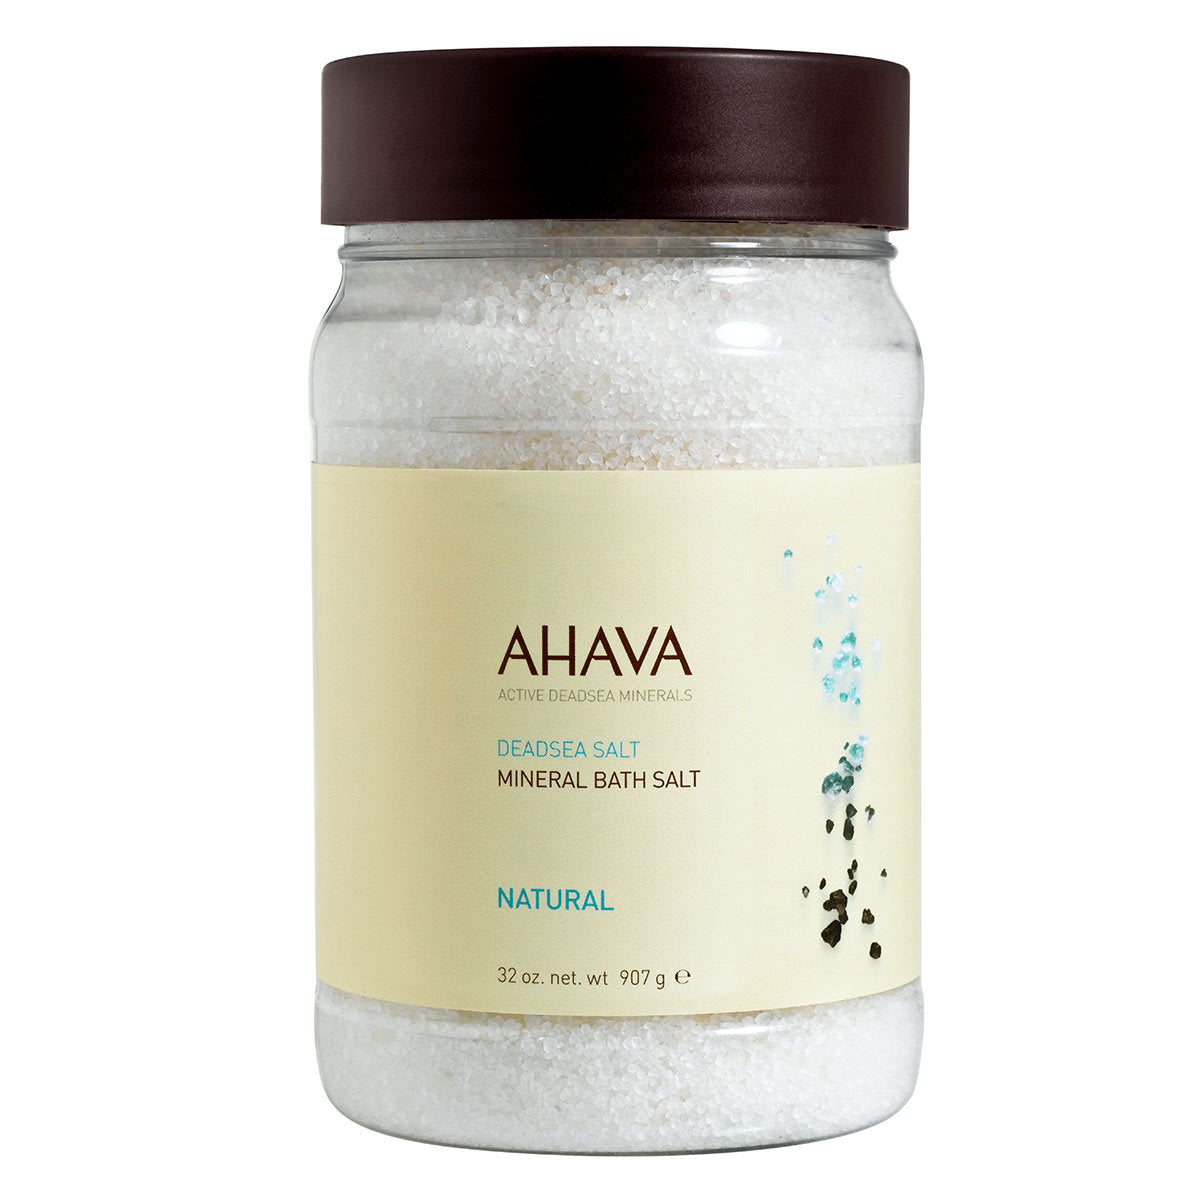 Primary image of Natural Mineral Bath Salts